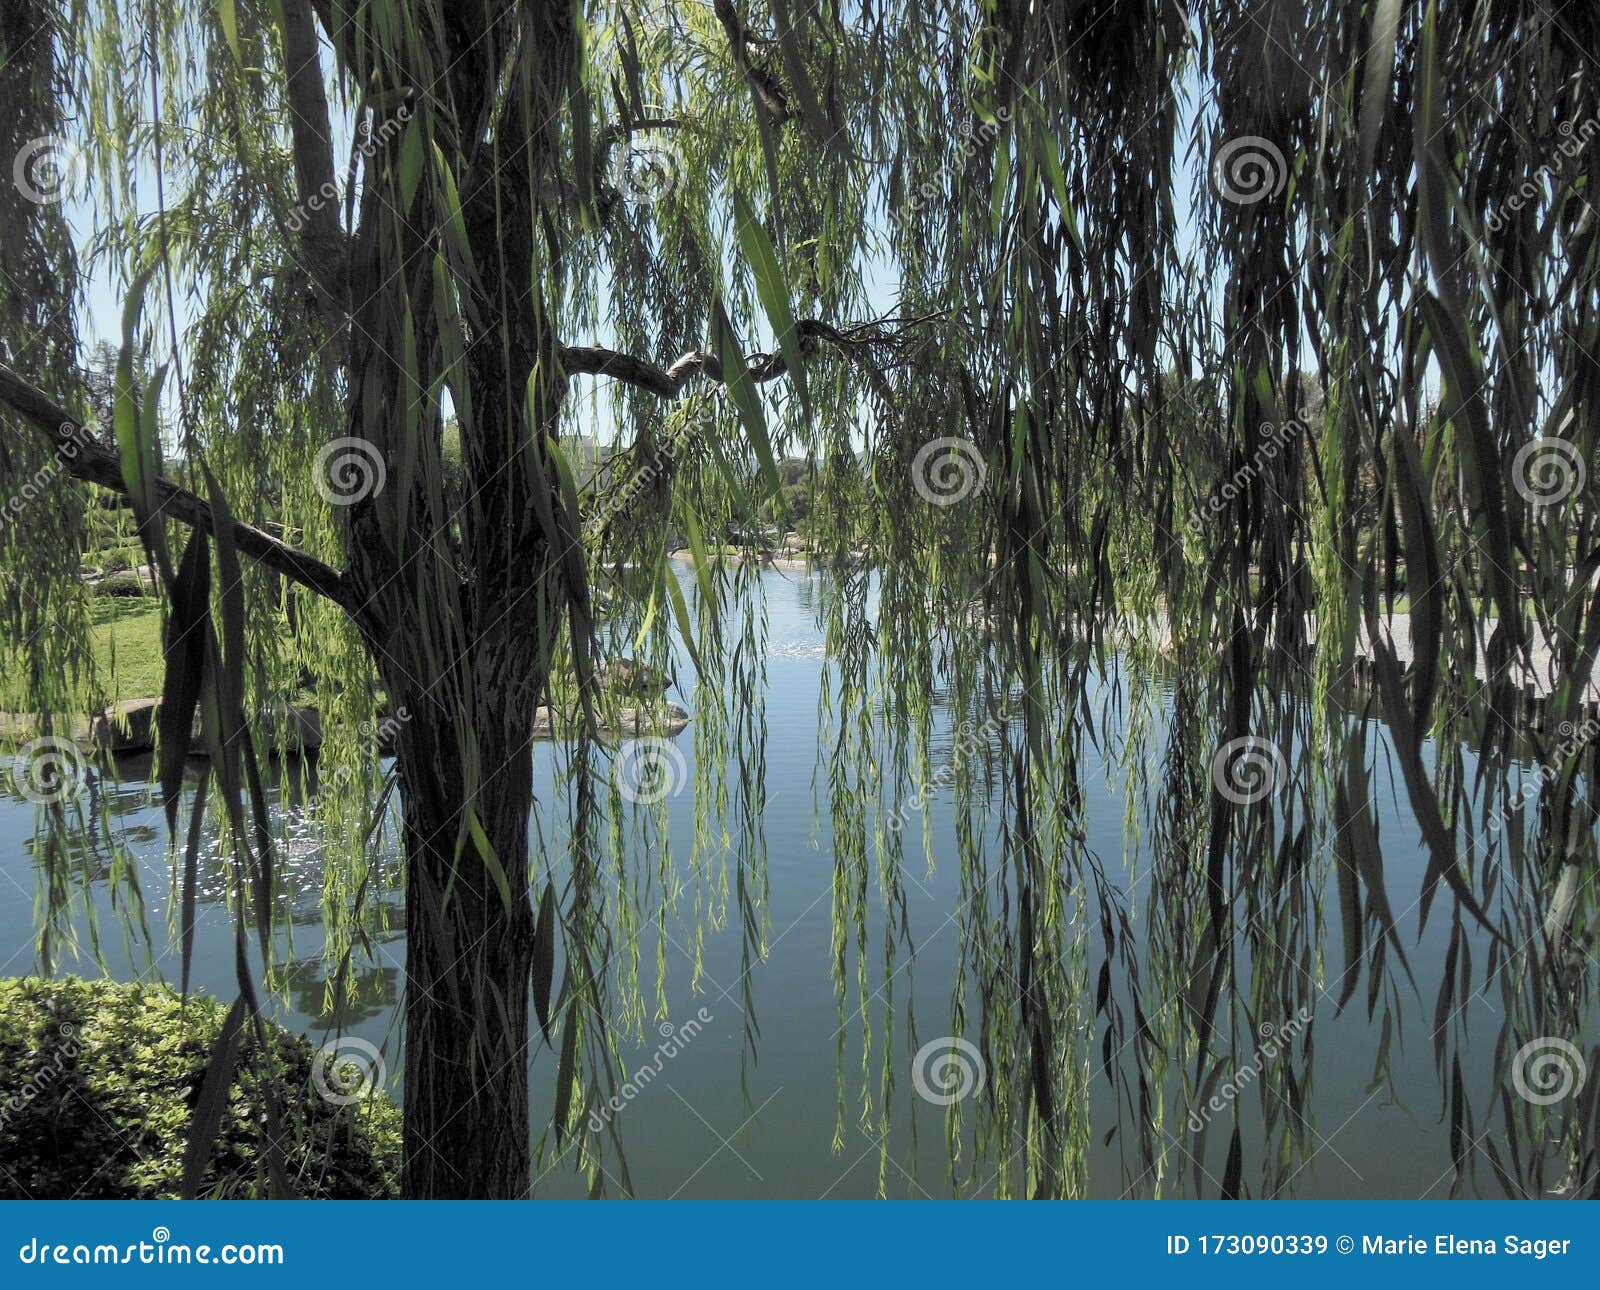 Weeping Willow Tree In Japan Background, Cherry Blossoms Weeping Cherry  Tree, Hd Photography Photo, Water Background Image And Wallpaper for Free  Download